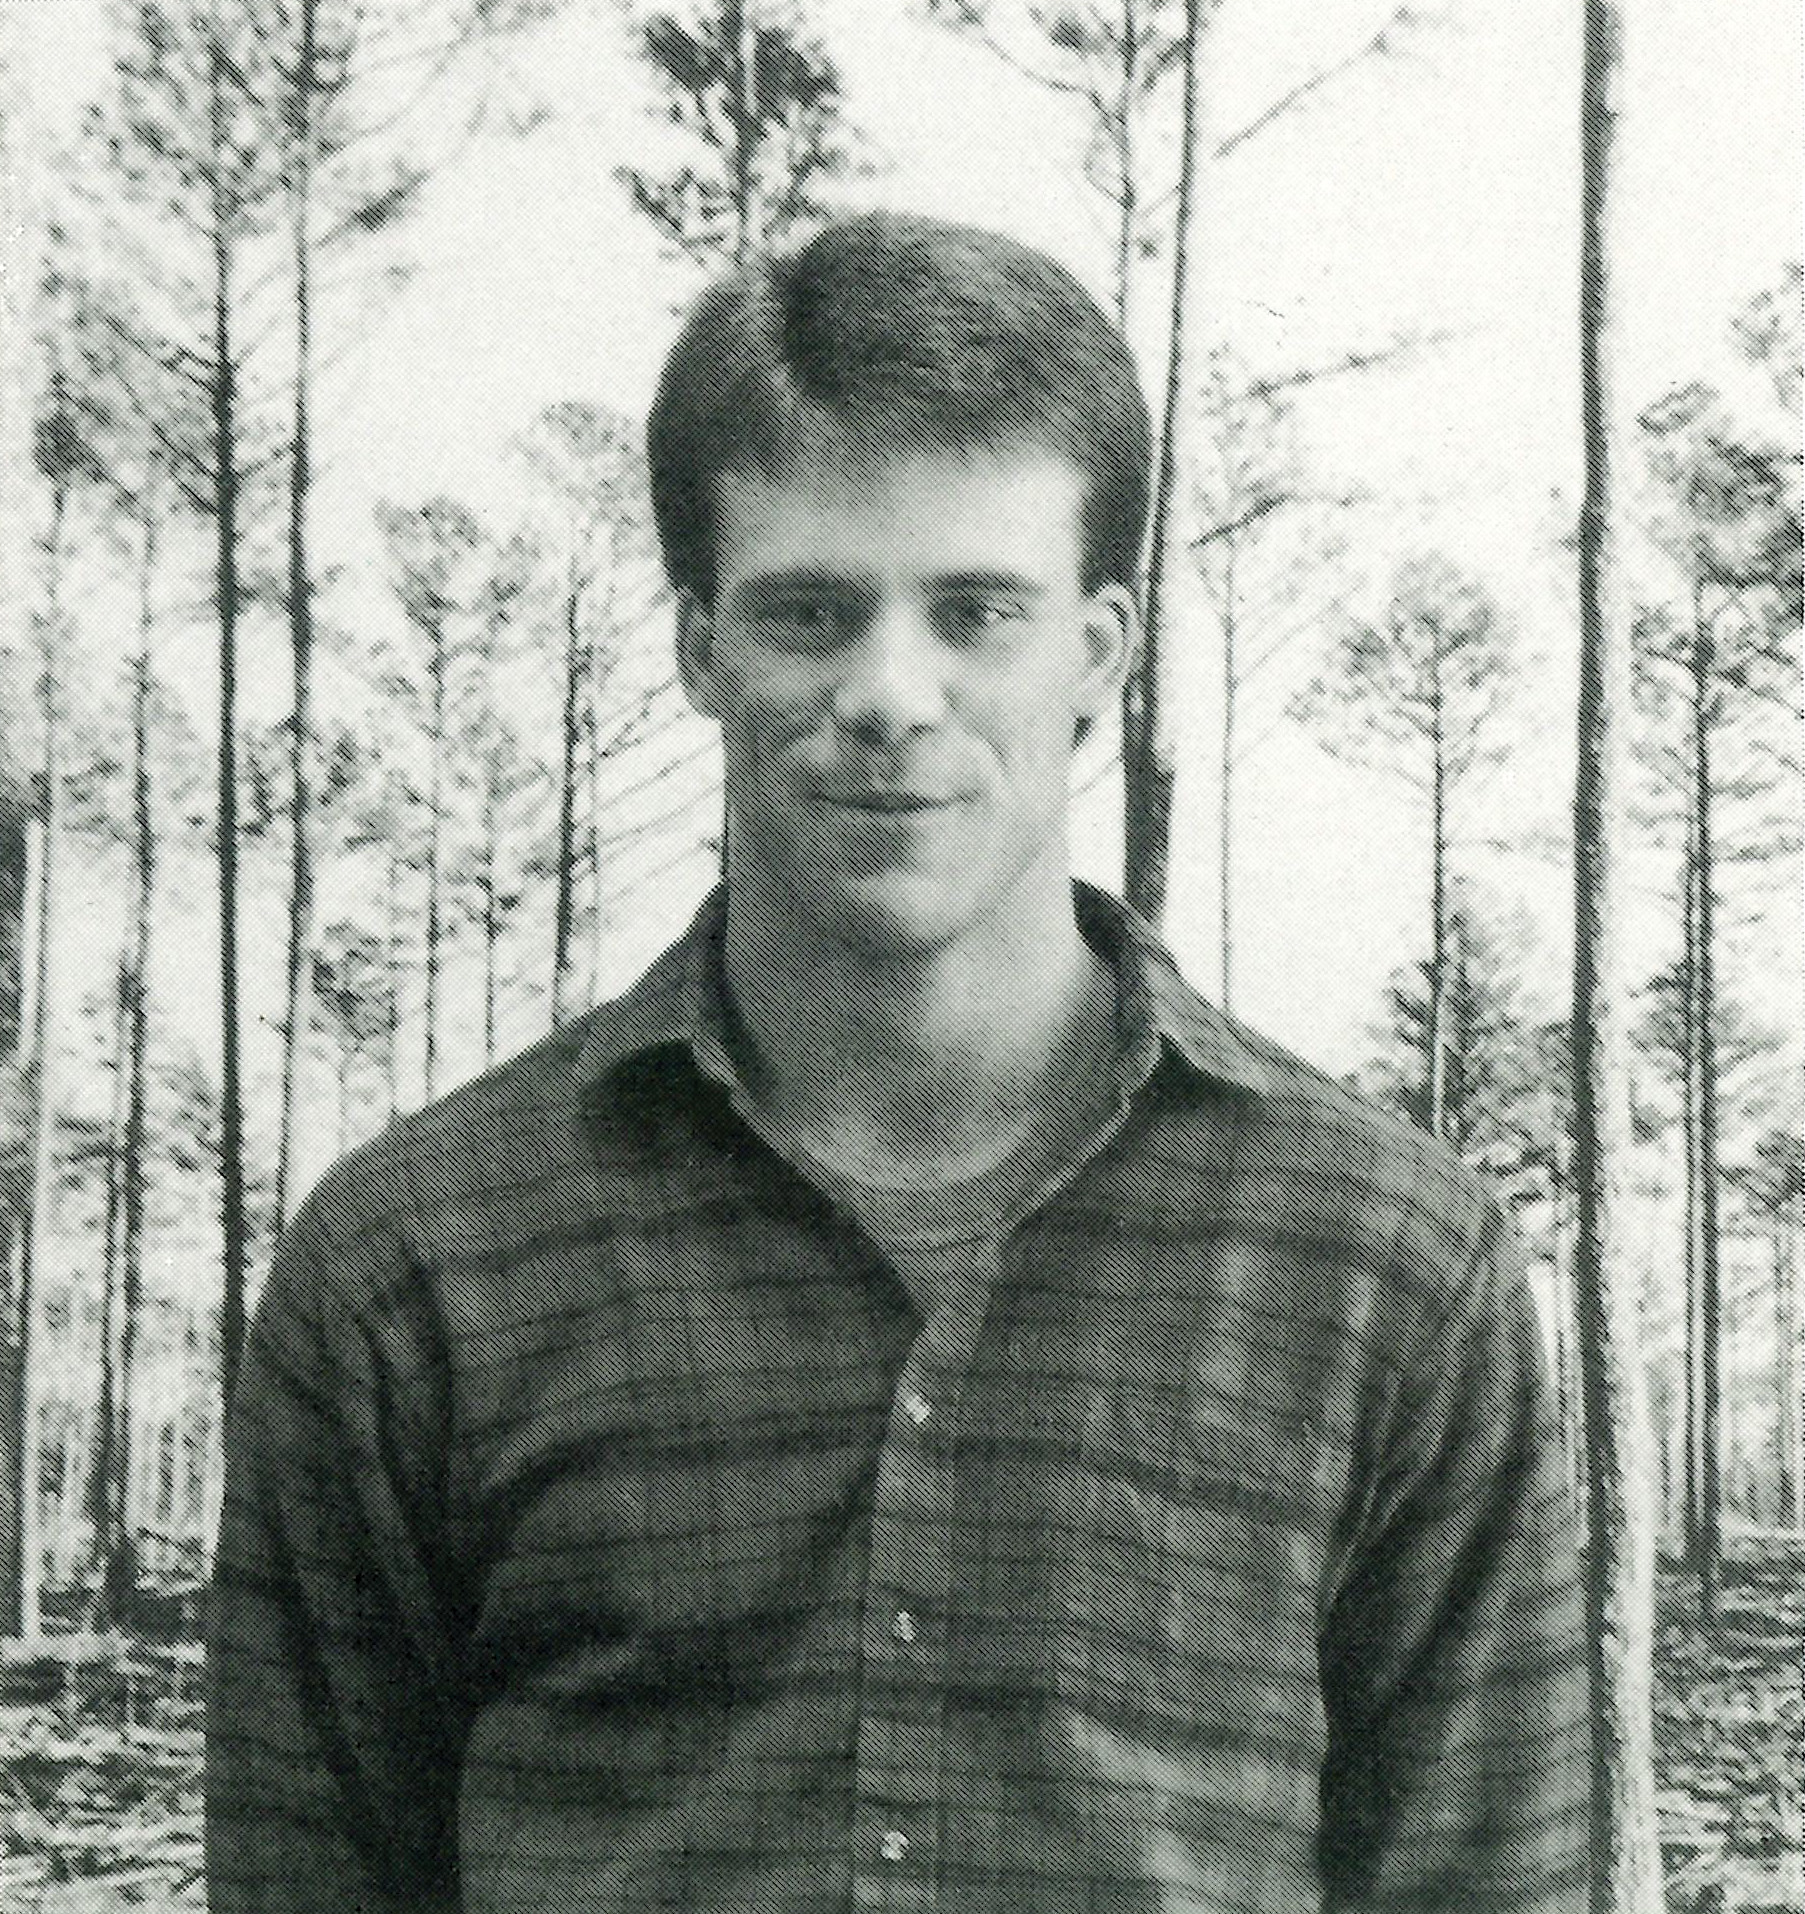 A black and white photo from 1989 of Easton Loving standing front of a backdrop of tall skinny pine trees.